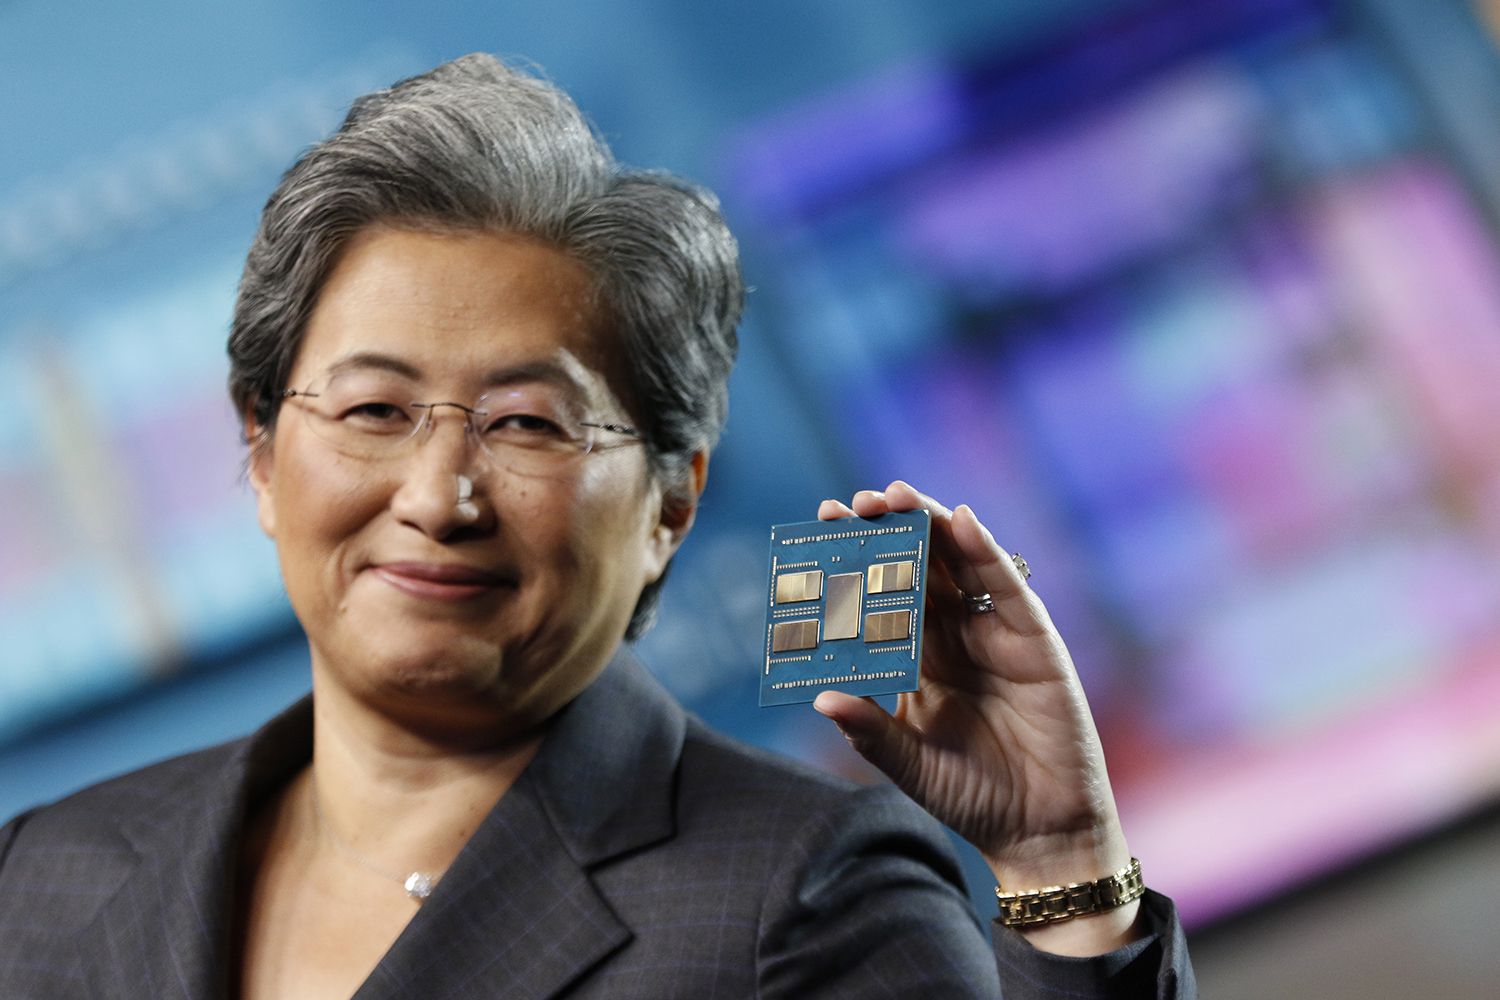 Lisa Su, AMD President and CEO, introducing the fourth generation of EPYC processors.